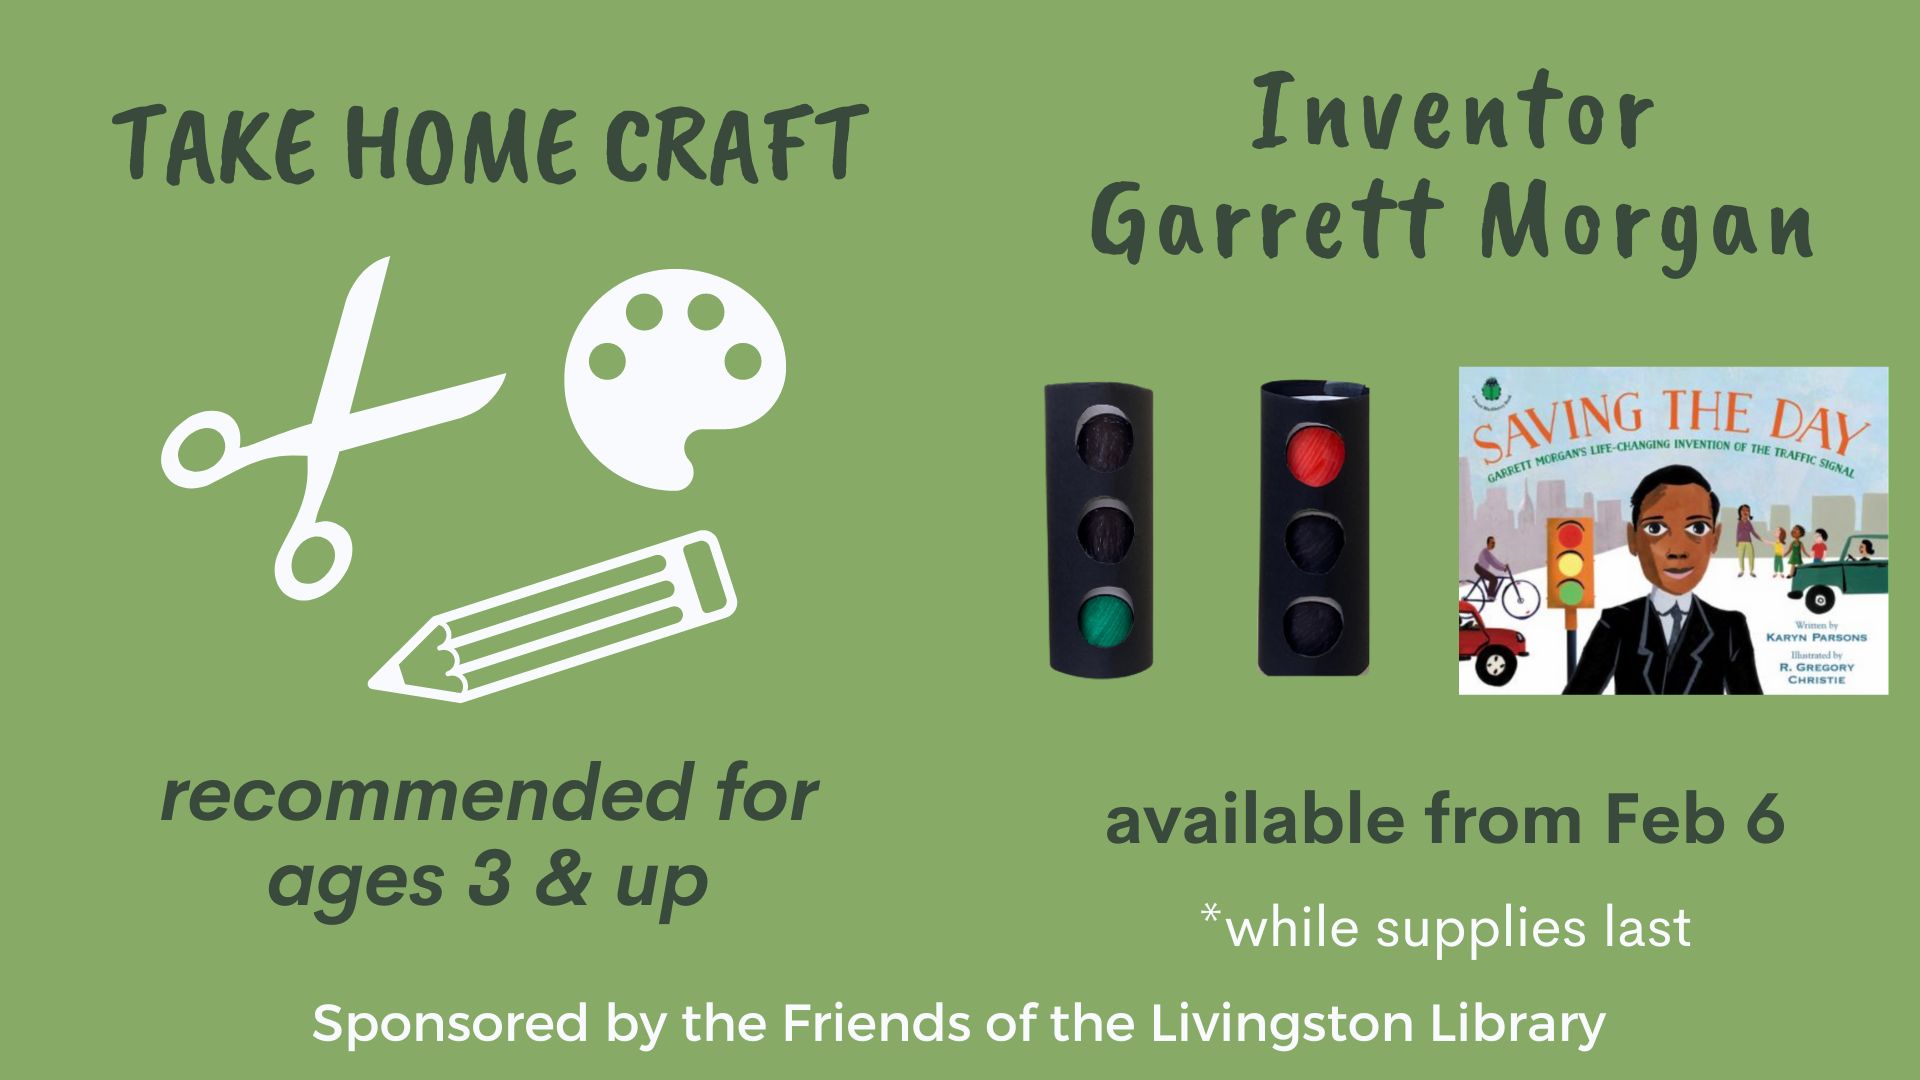 dark green text on a light green background reading take home craft, inventor garrett morgan with an image of a construction paper traffic light